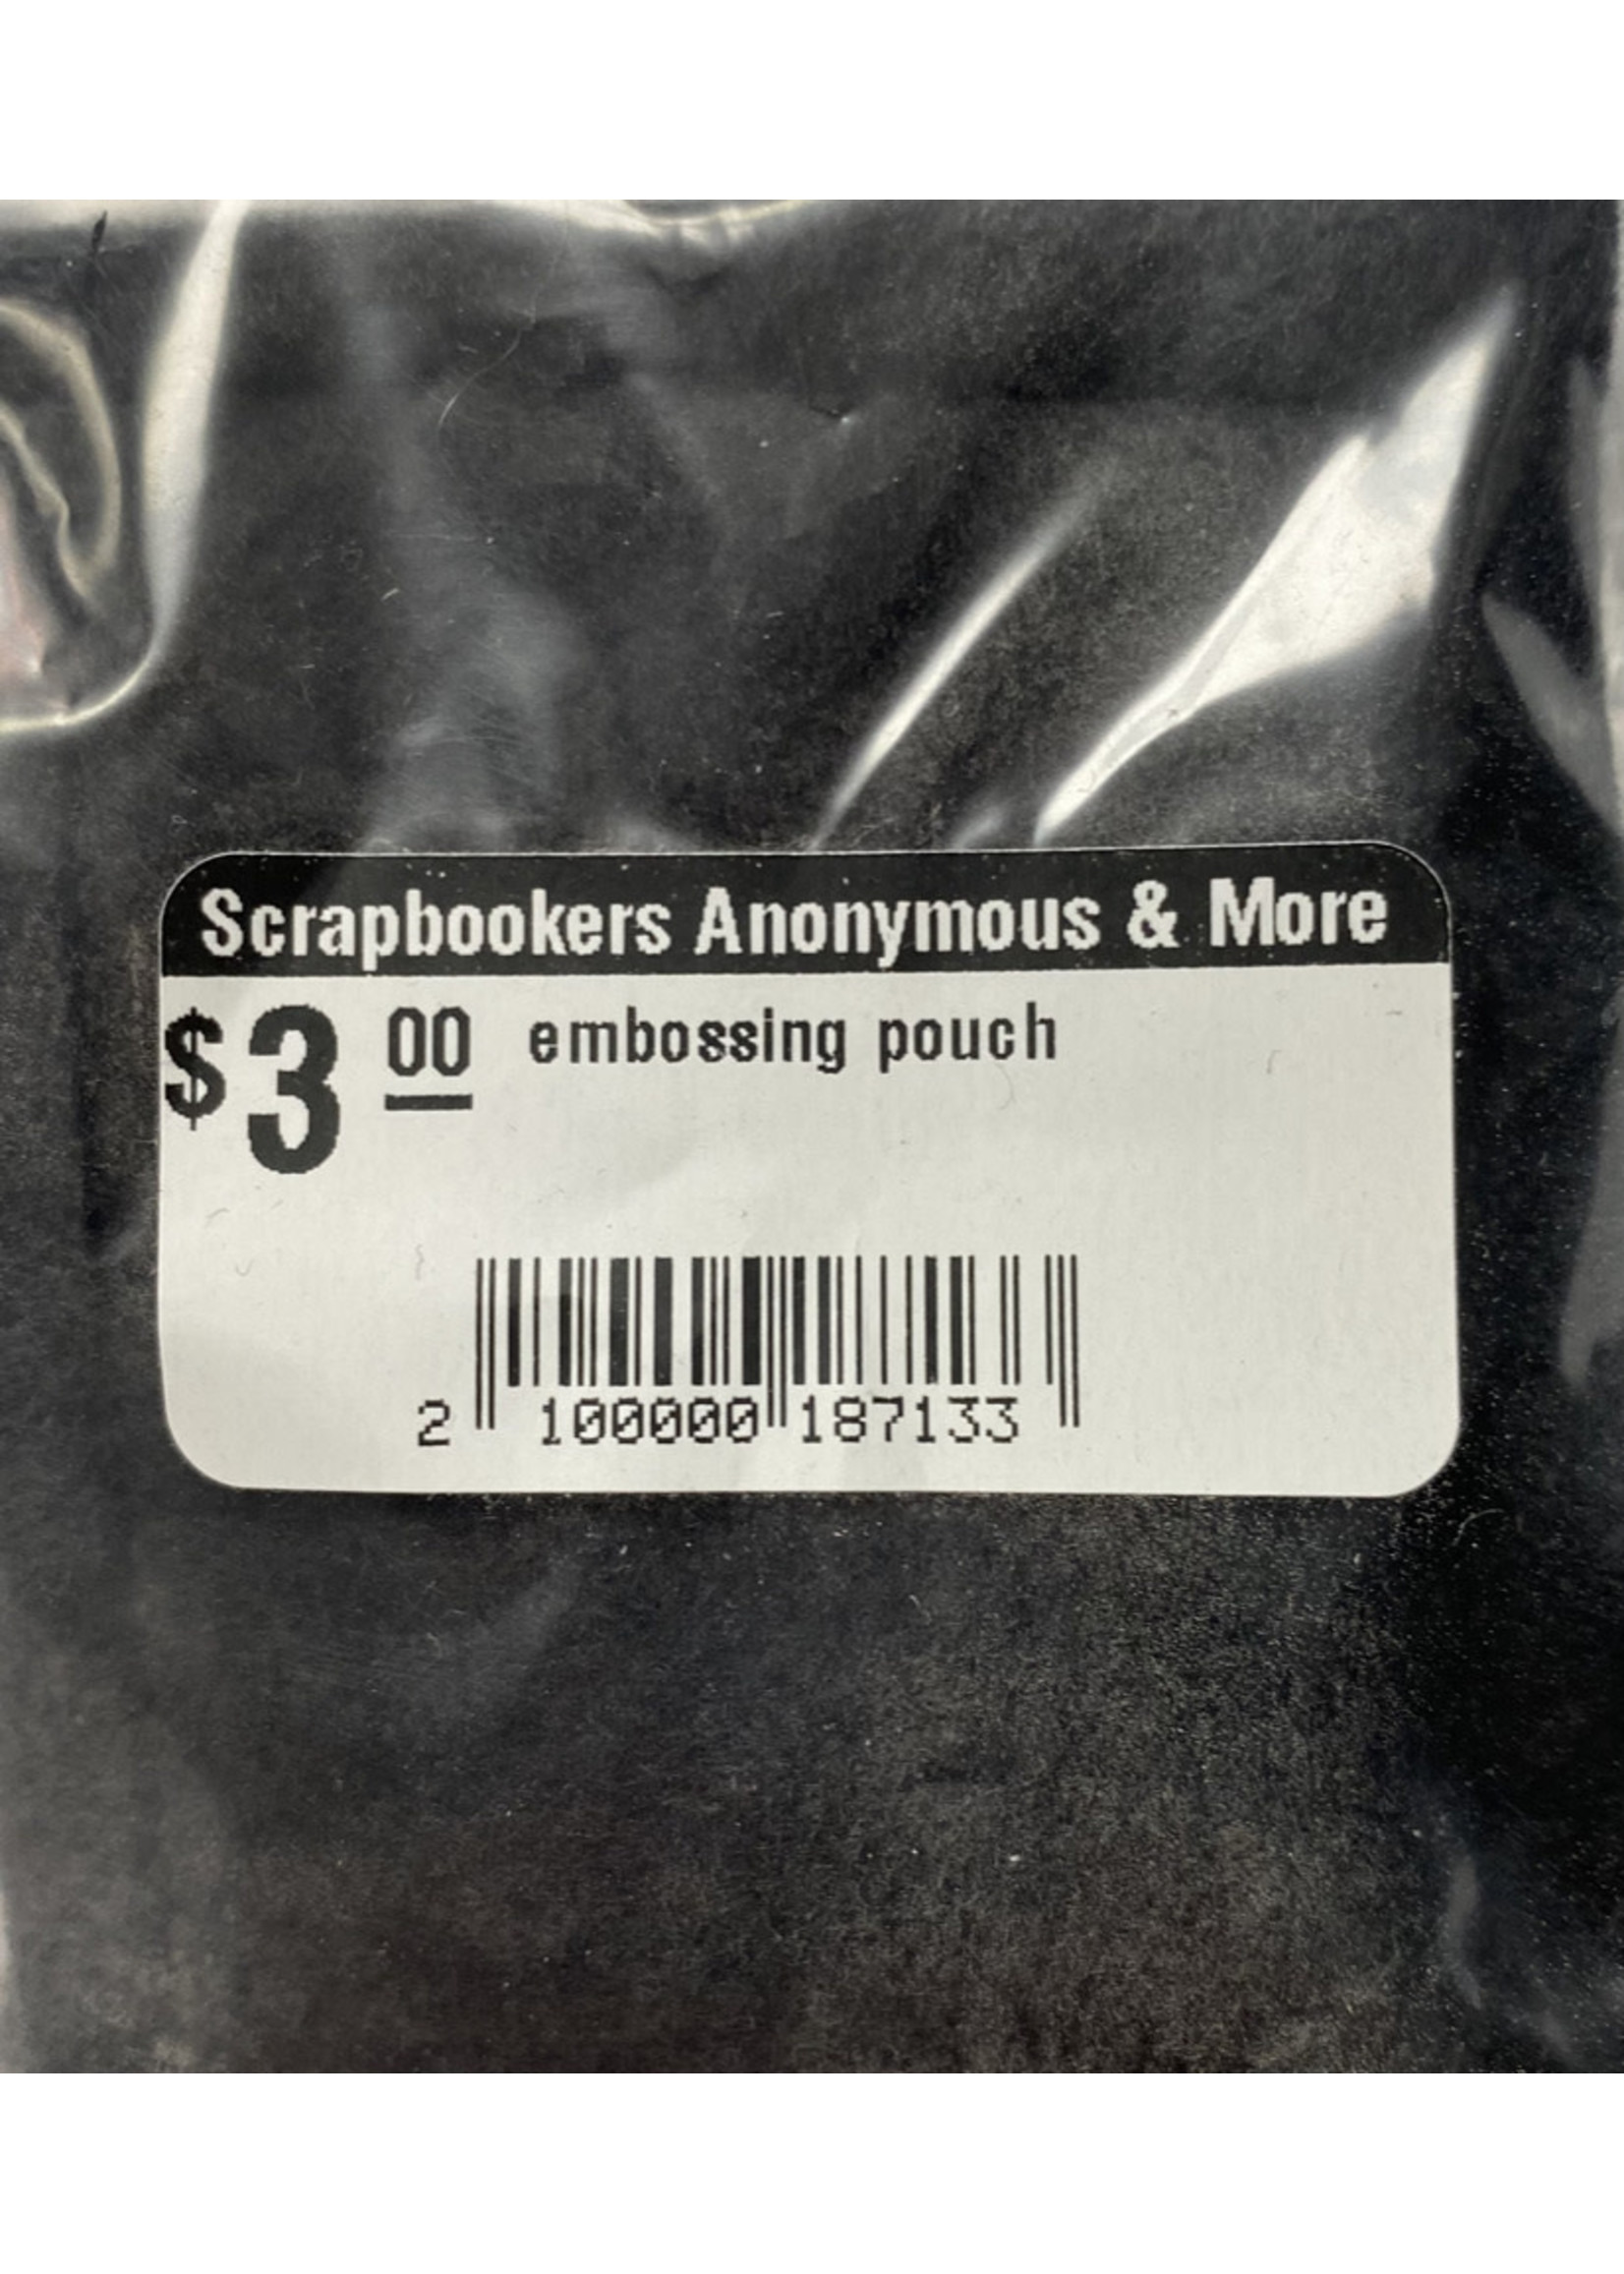 Scrapbookers Anonymous & More embossing pouch